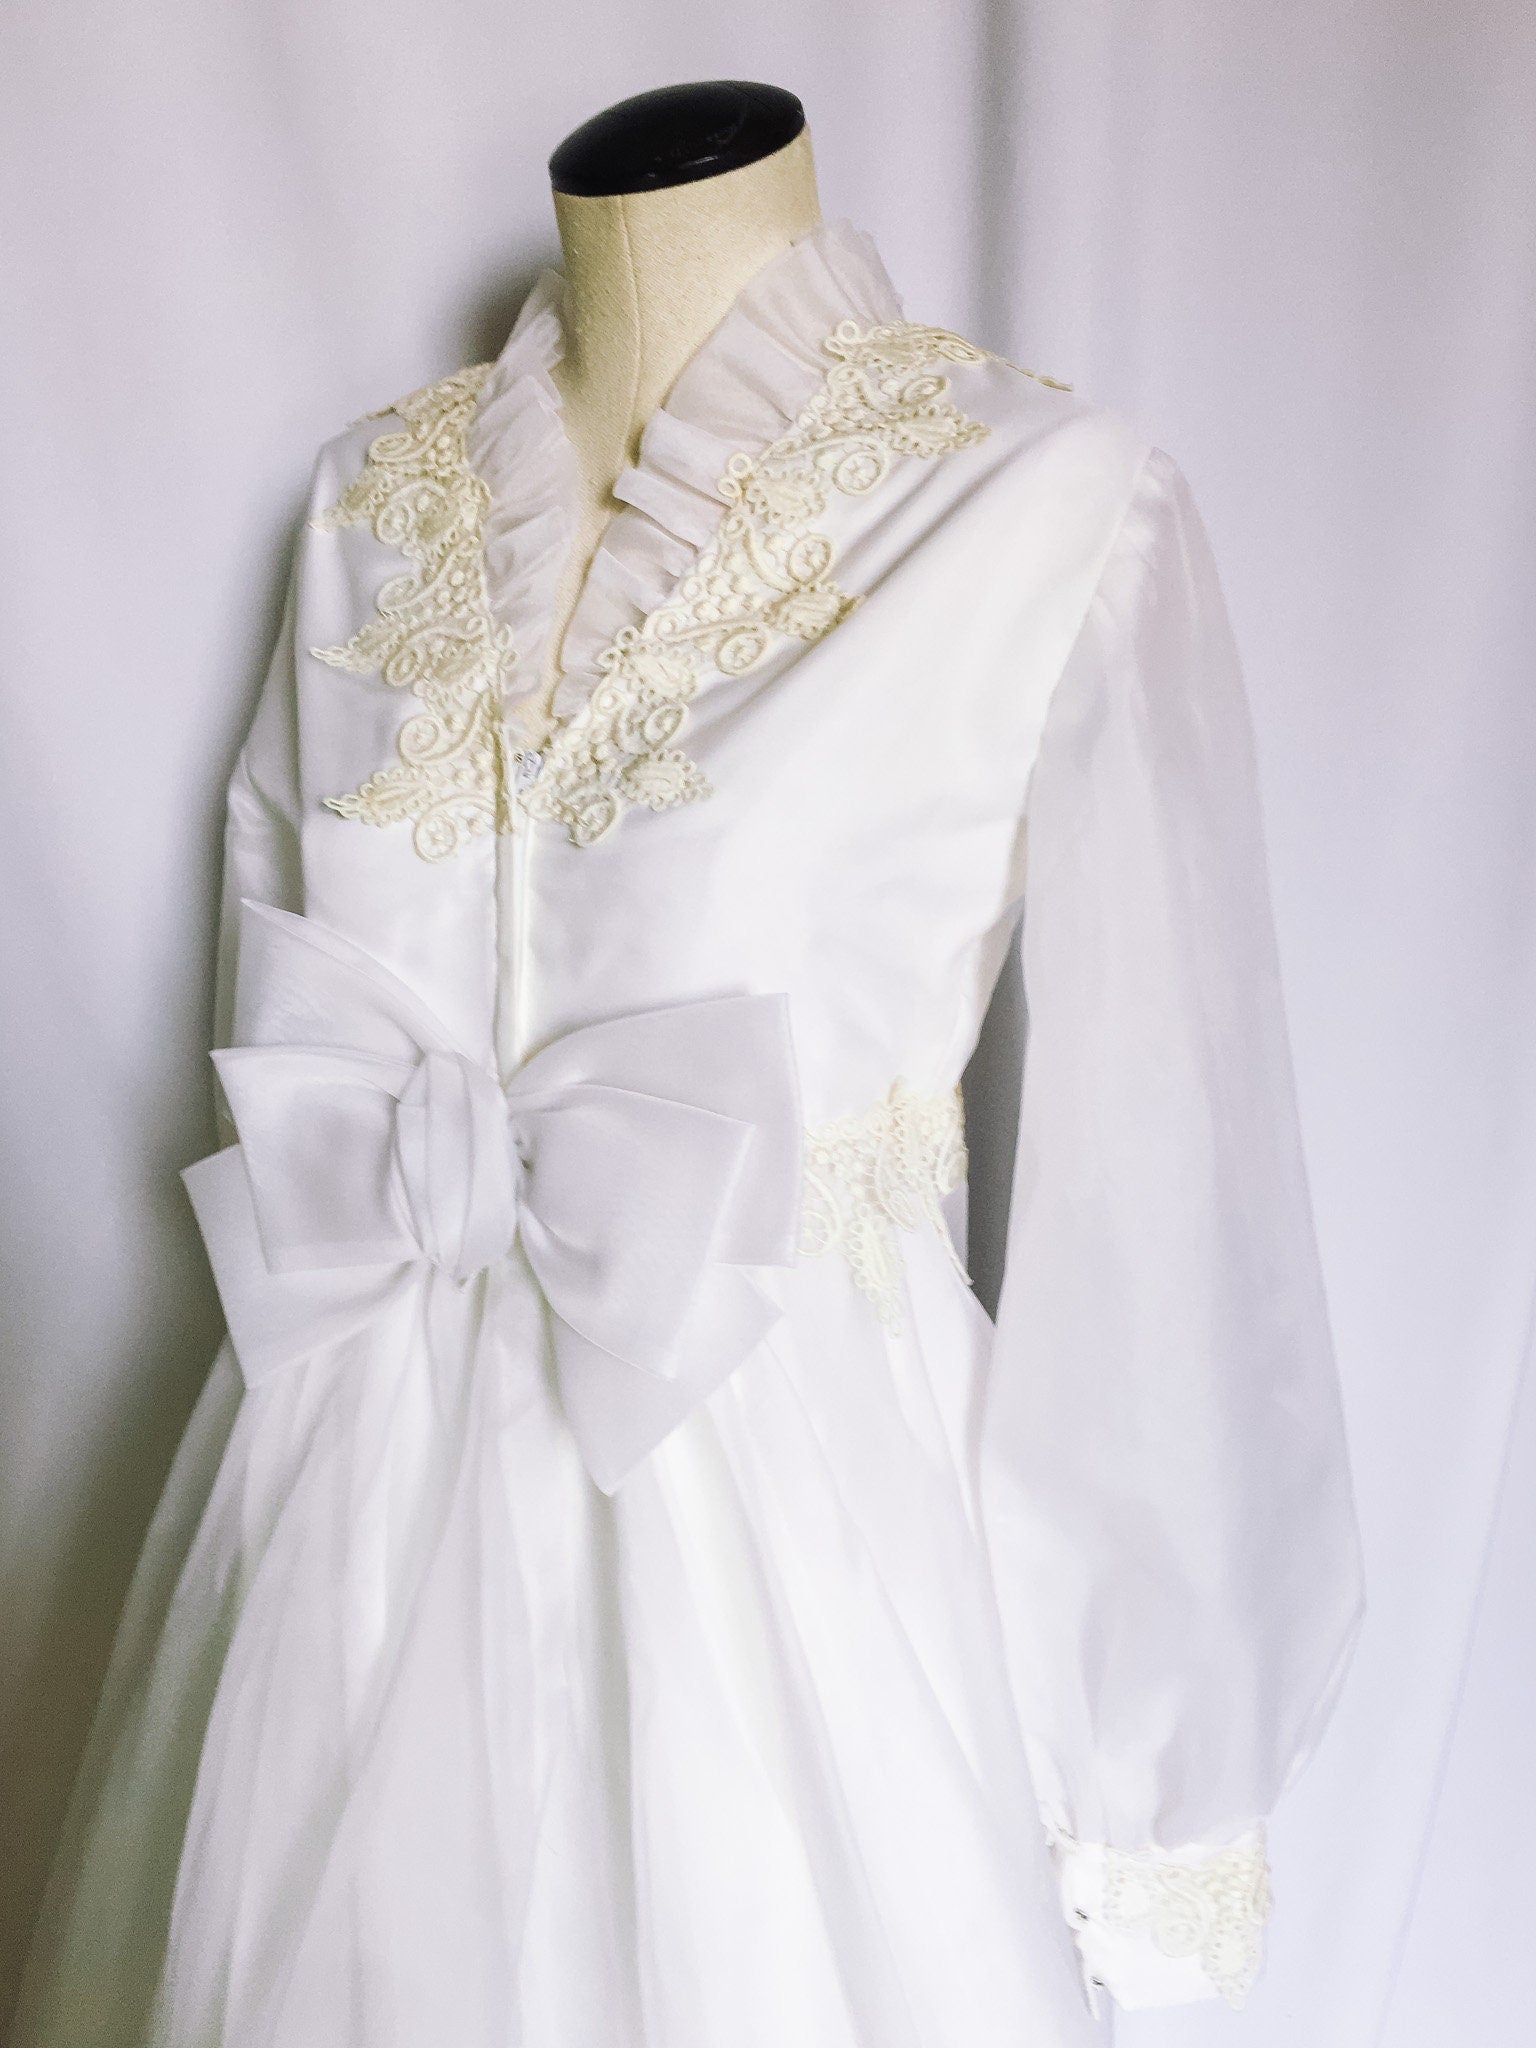 Vintage Long-sleeved Collared Wedding Dress with Cream Lace Detailing